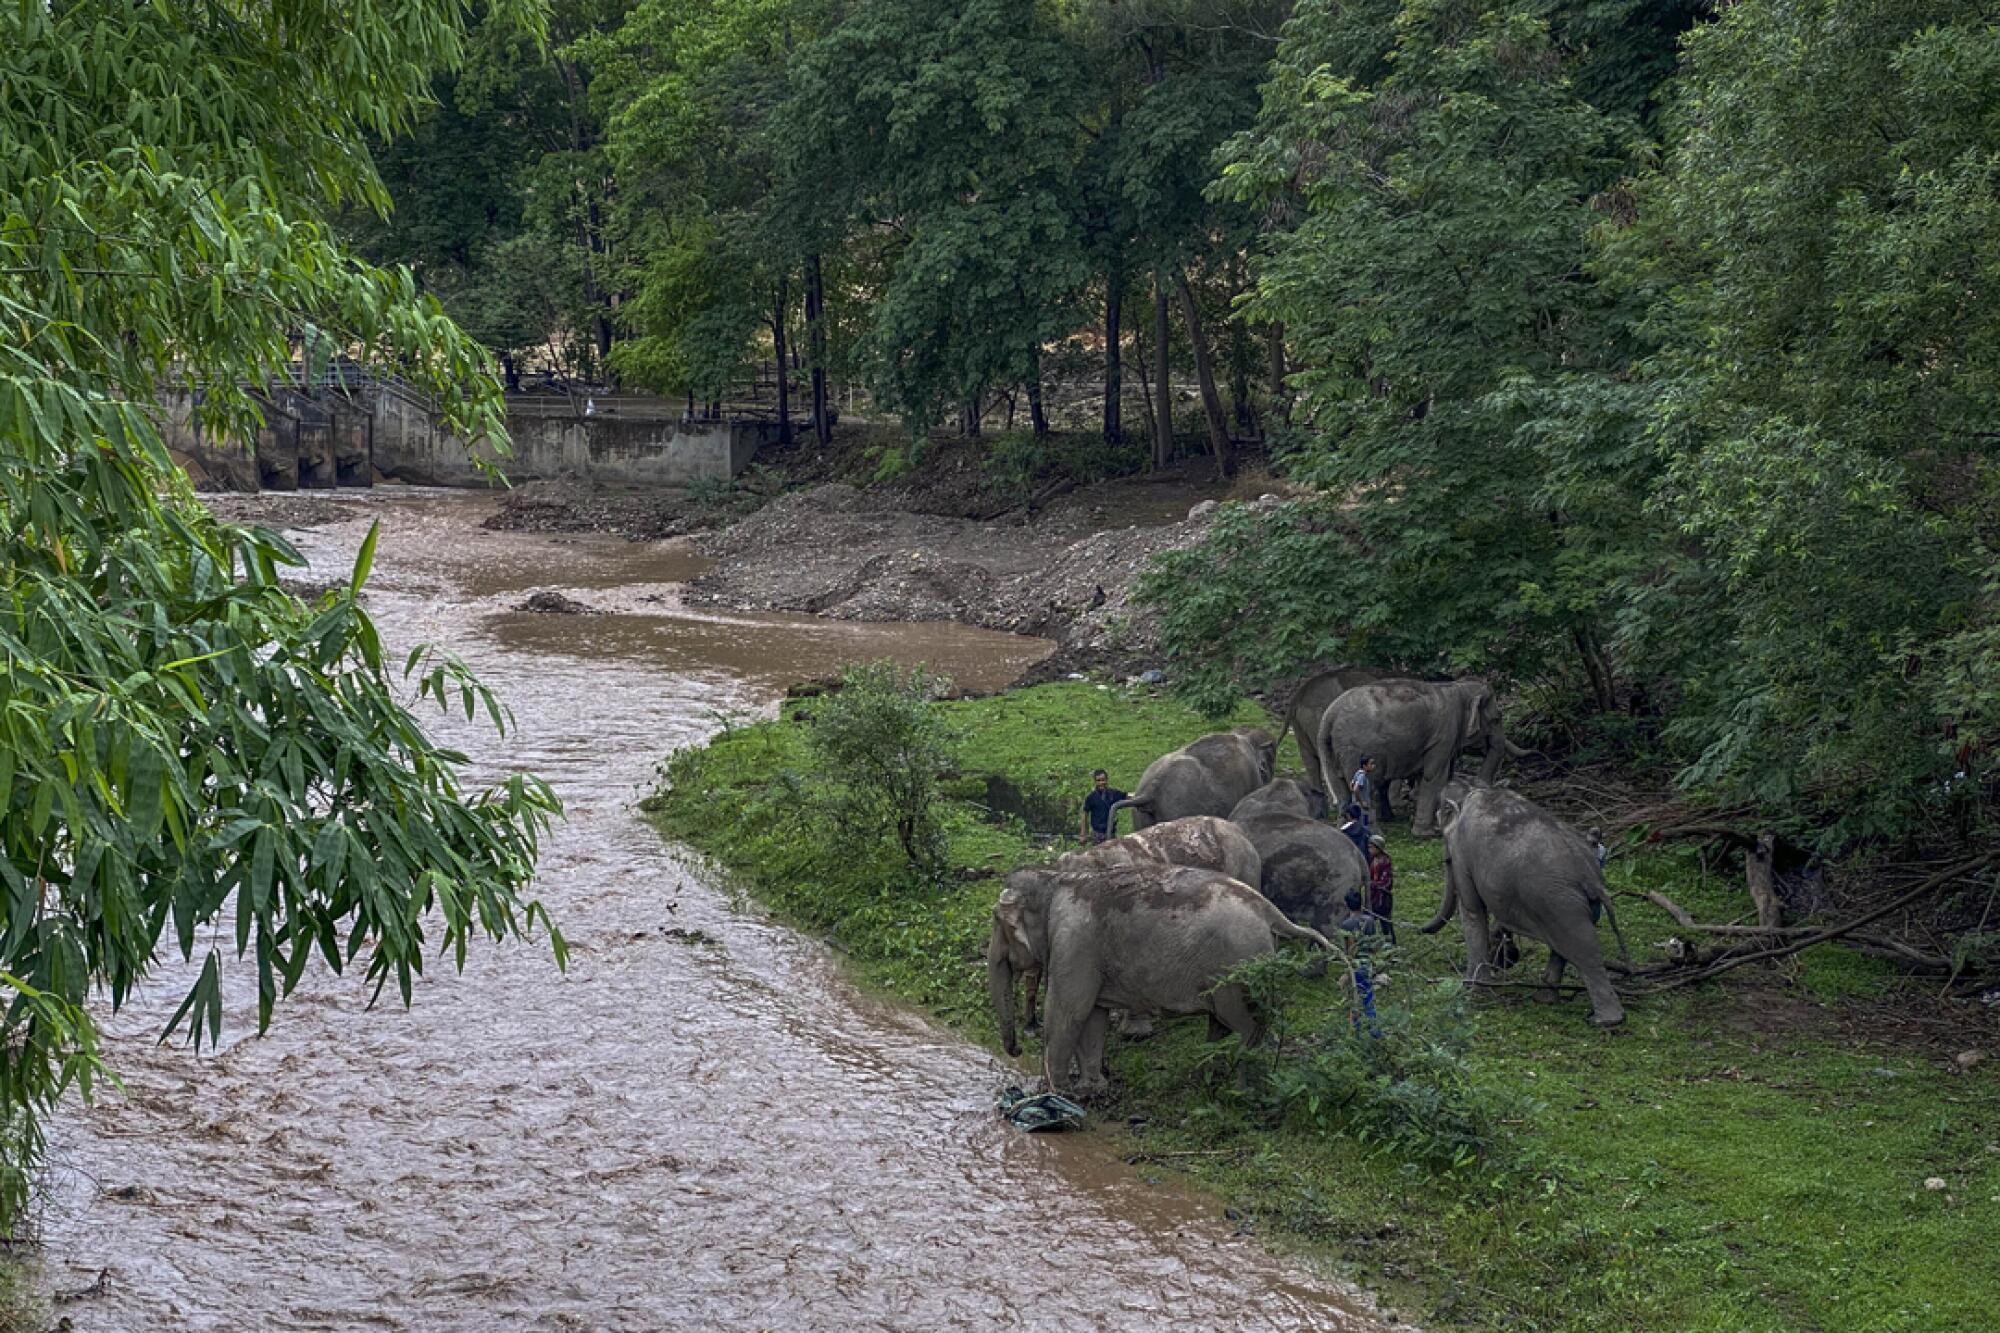 The herd takes a break on the shore of a river. The project to bring unemployed elephants home was launched in response to appeals from their owners.